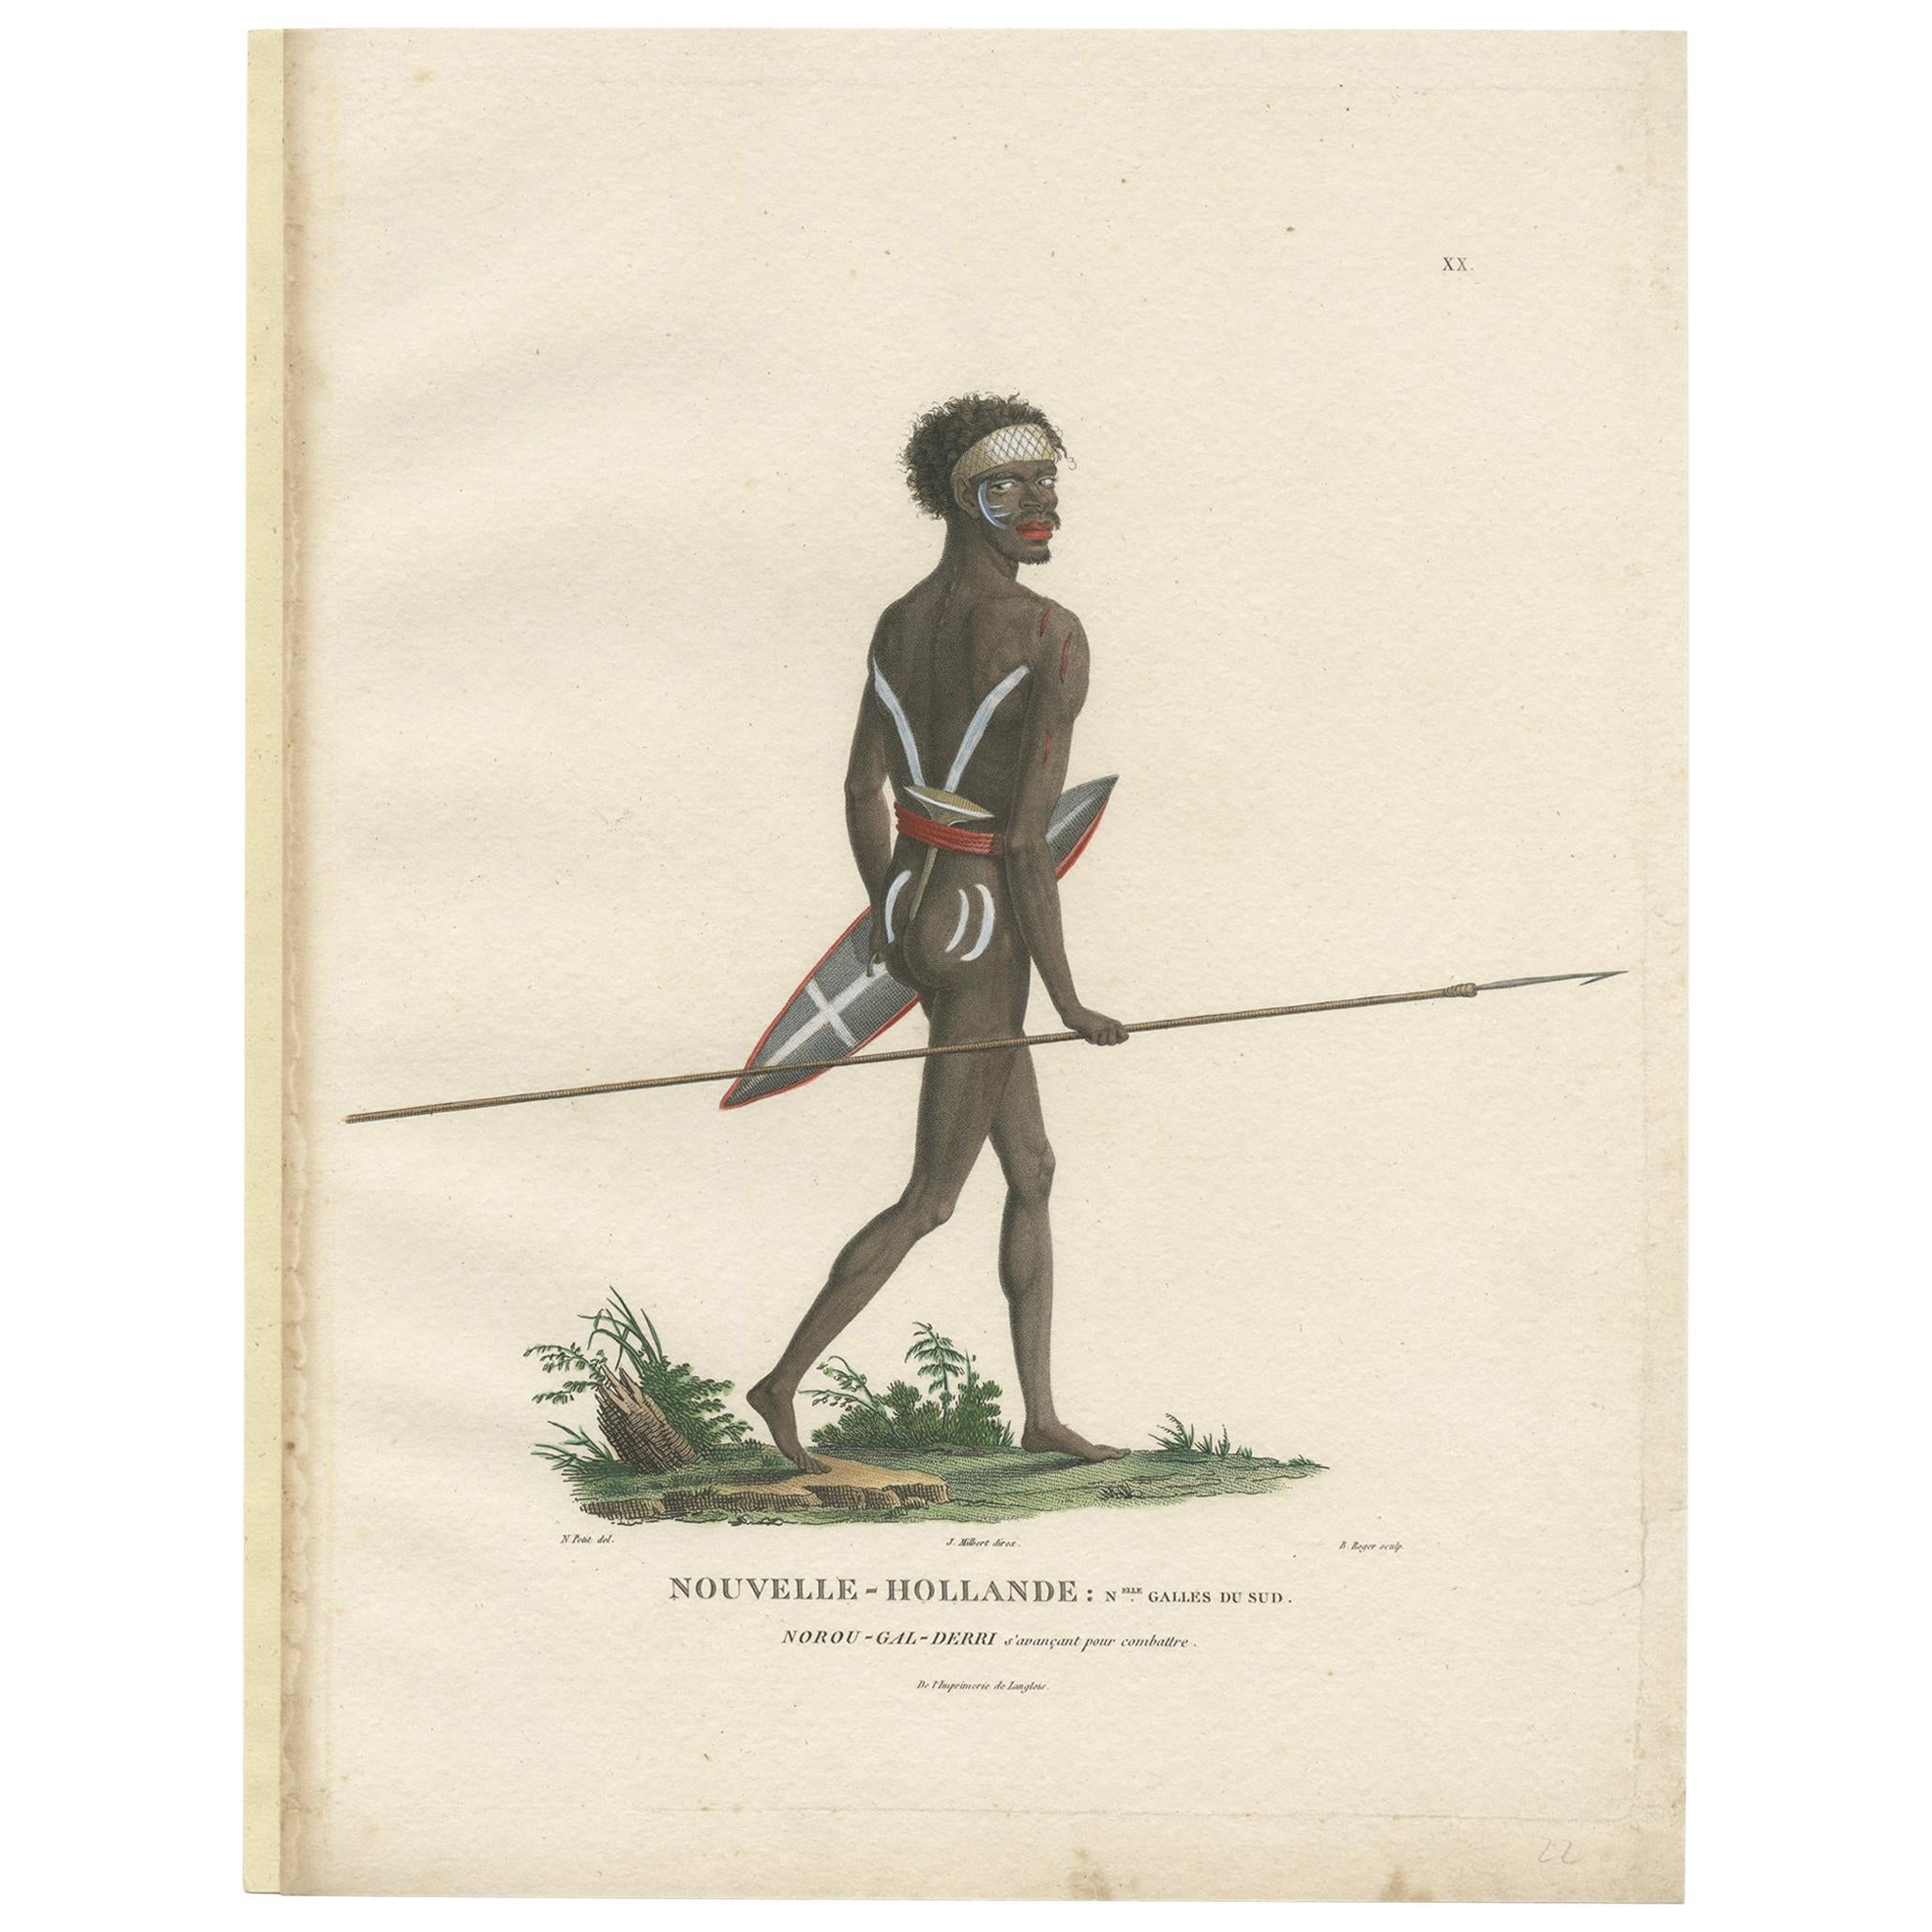 Antique Hand-Colored Print of an Indigenous Australian Man by Peron 'circa 1810'